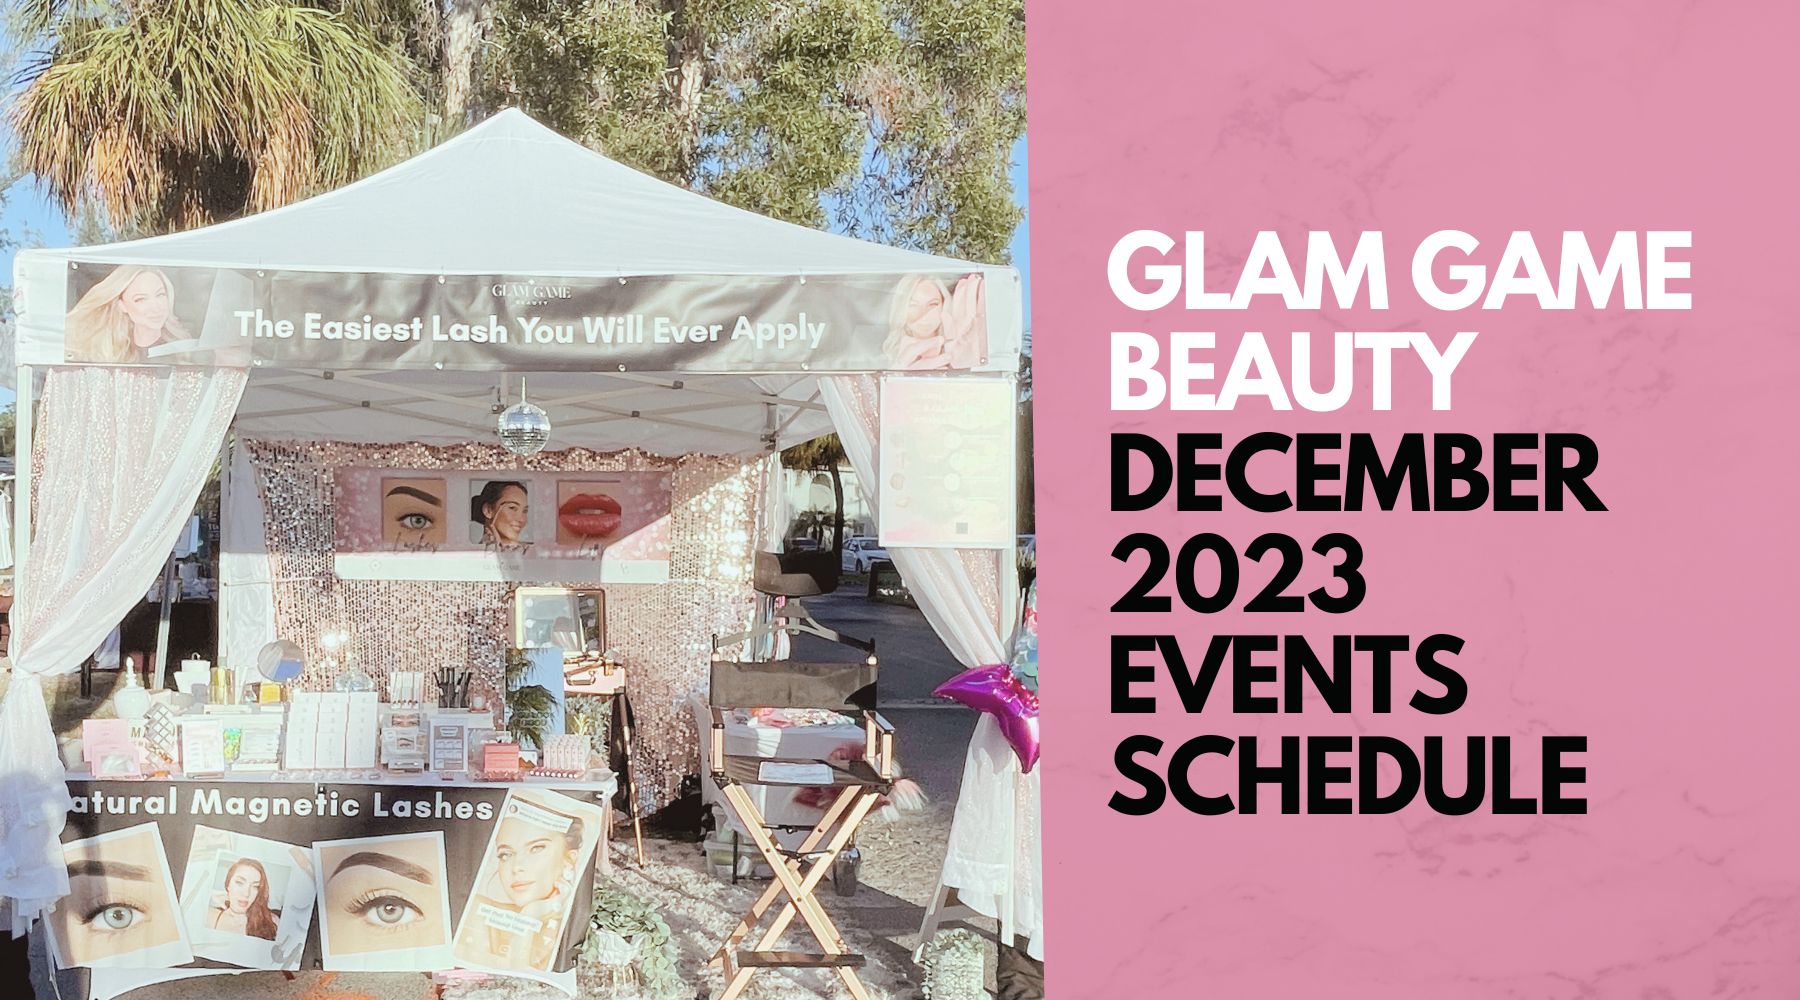 Glam Game Beauty December 2023 Pop-up Events Schedule